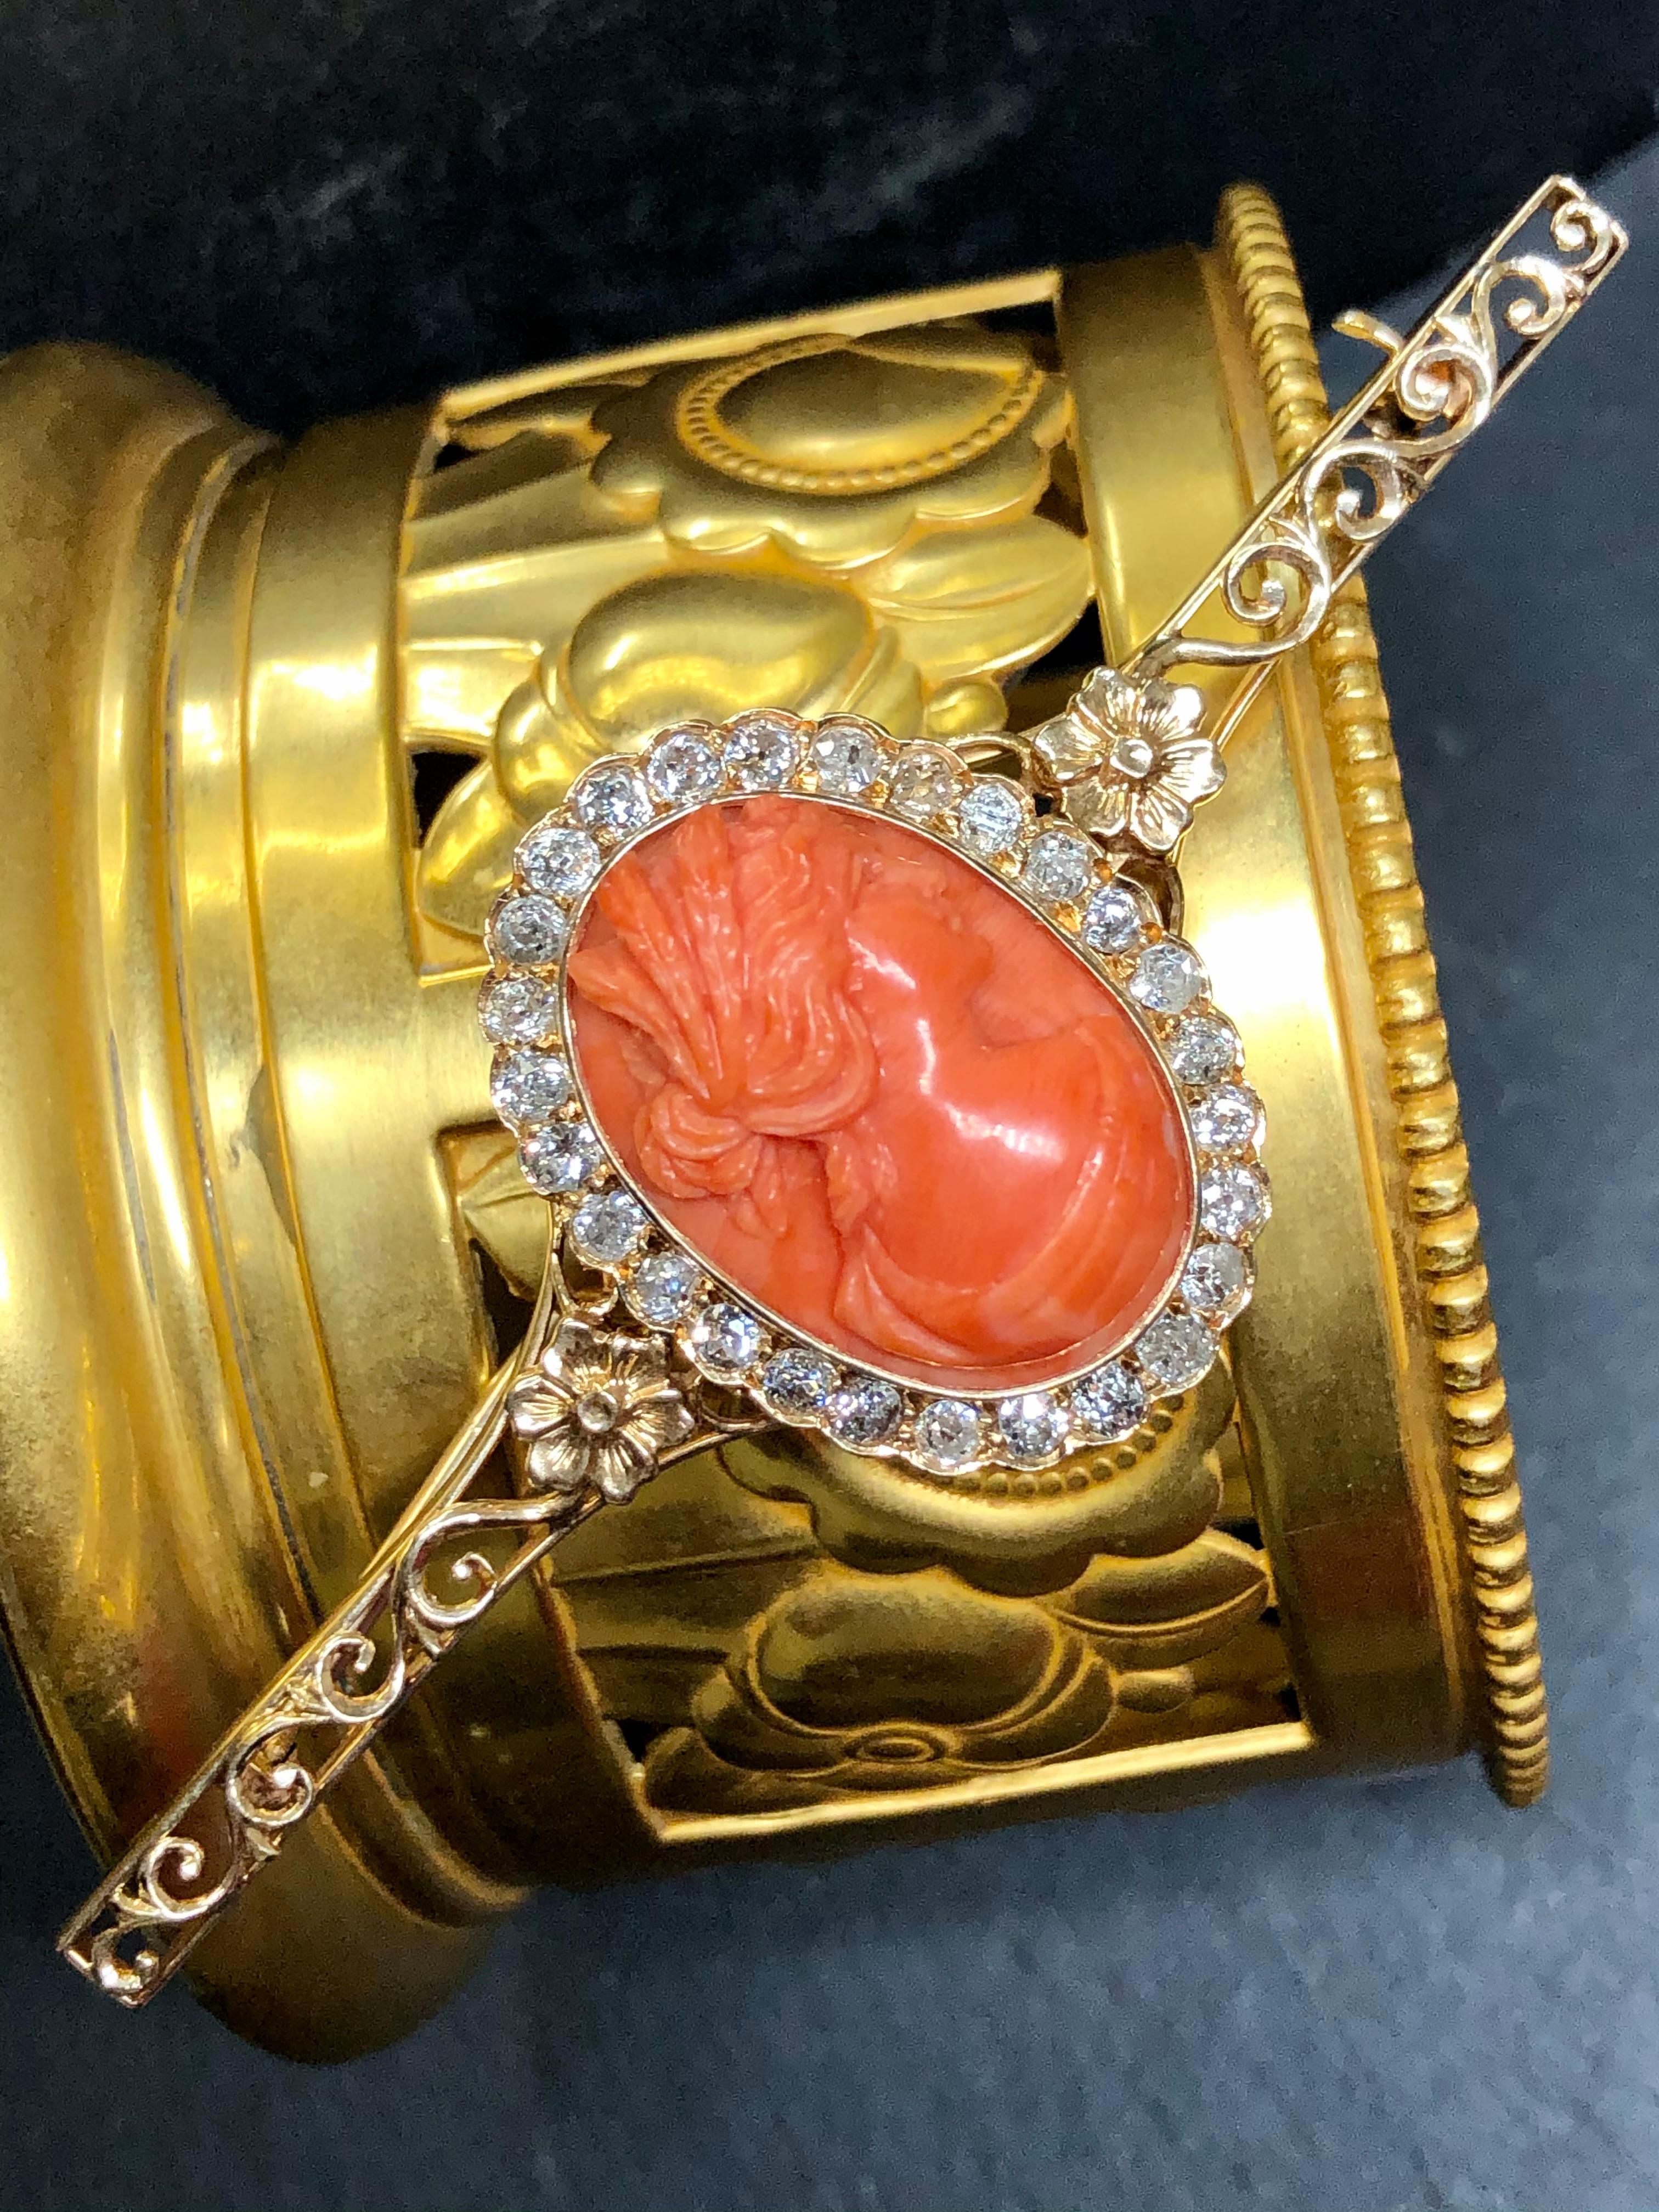 An original antique Victorian brooch done in 14K yellow gold and set with approximately 2.16cttw in Si1 to imperfect antique mine-cut diamonds (two stones chipped) and centered by a beautifully carved coral cameo. An impressive piece of jewelry